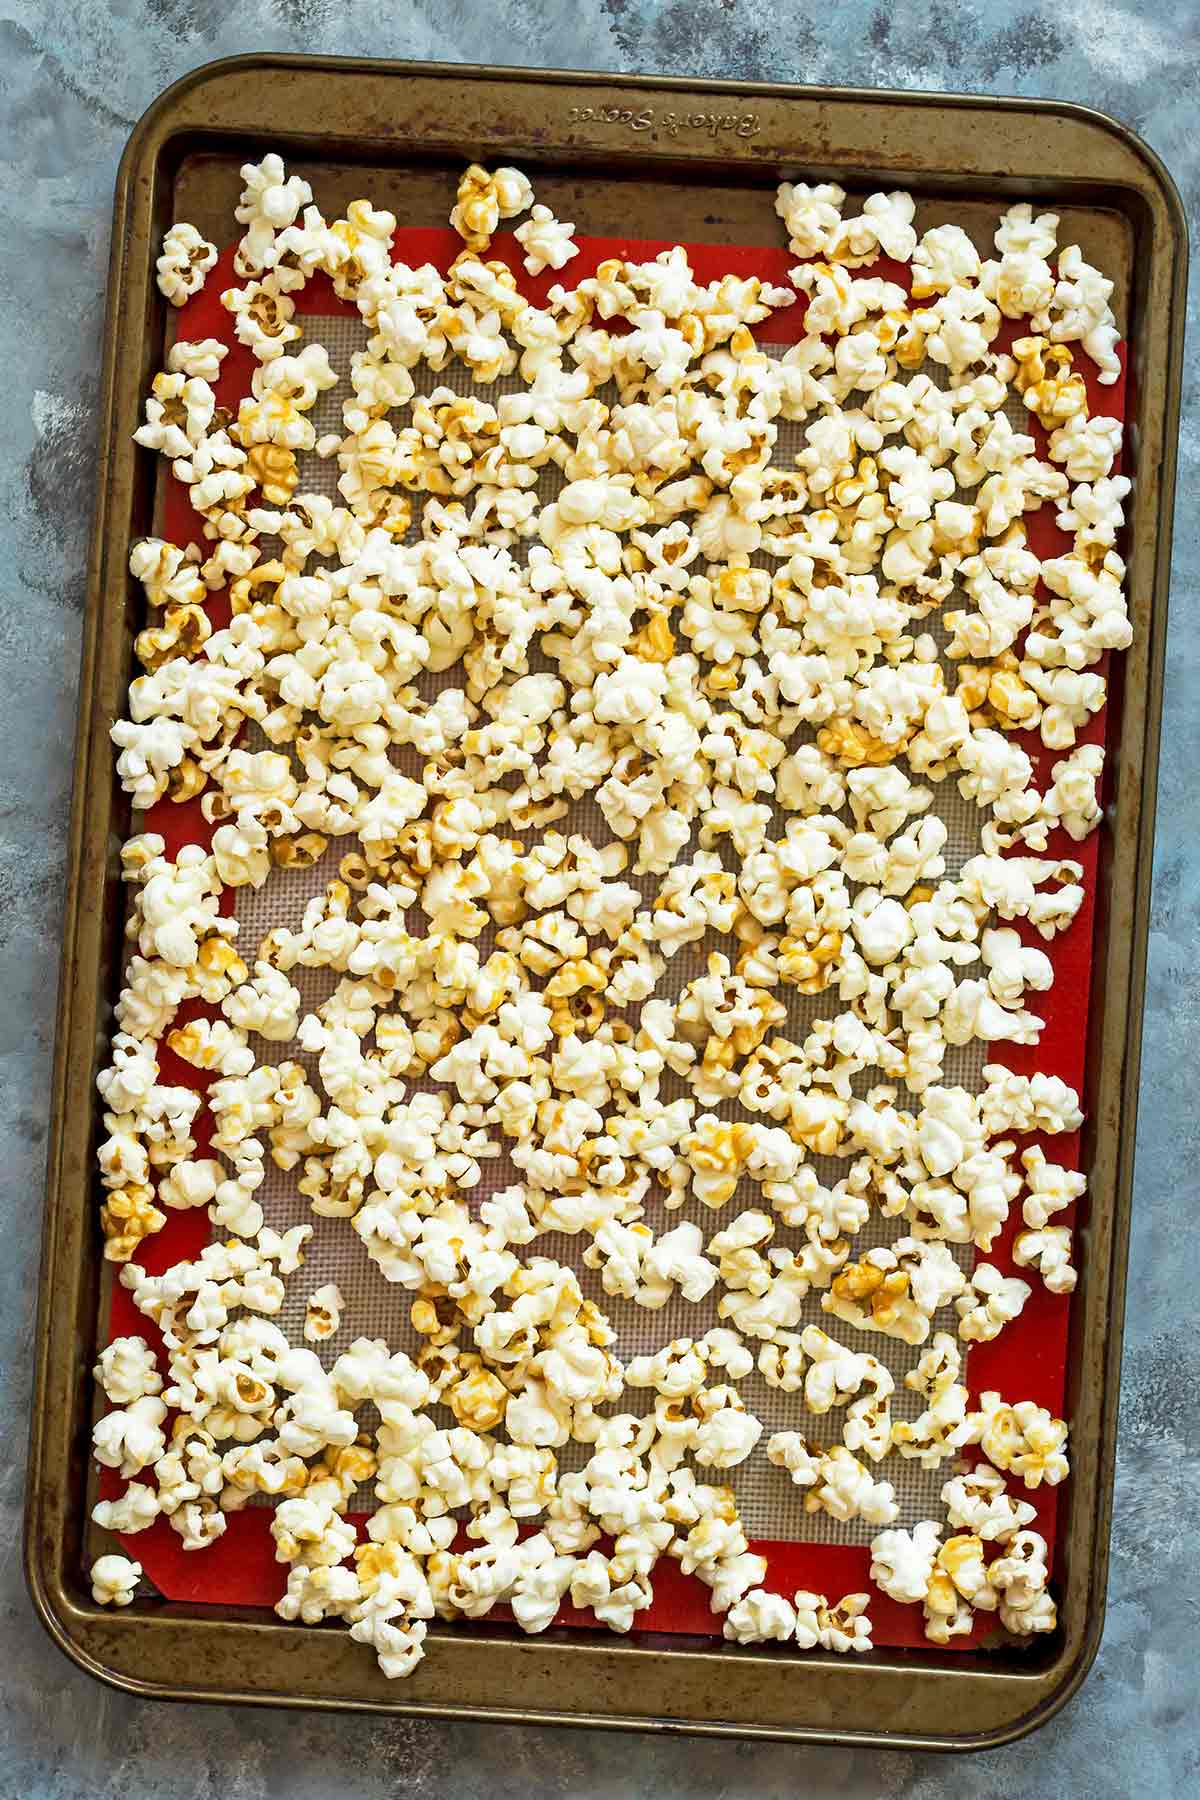 Caramel corn spread out on lined baking sheet